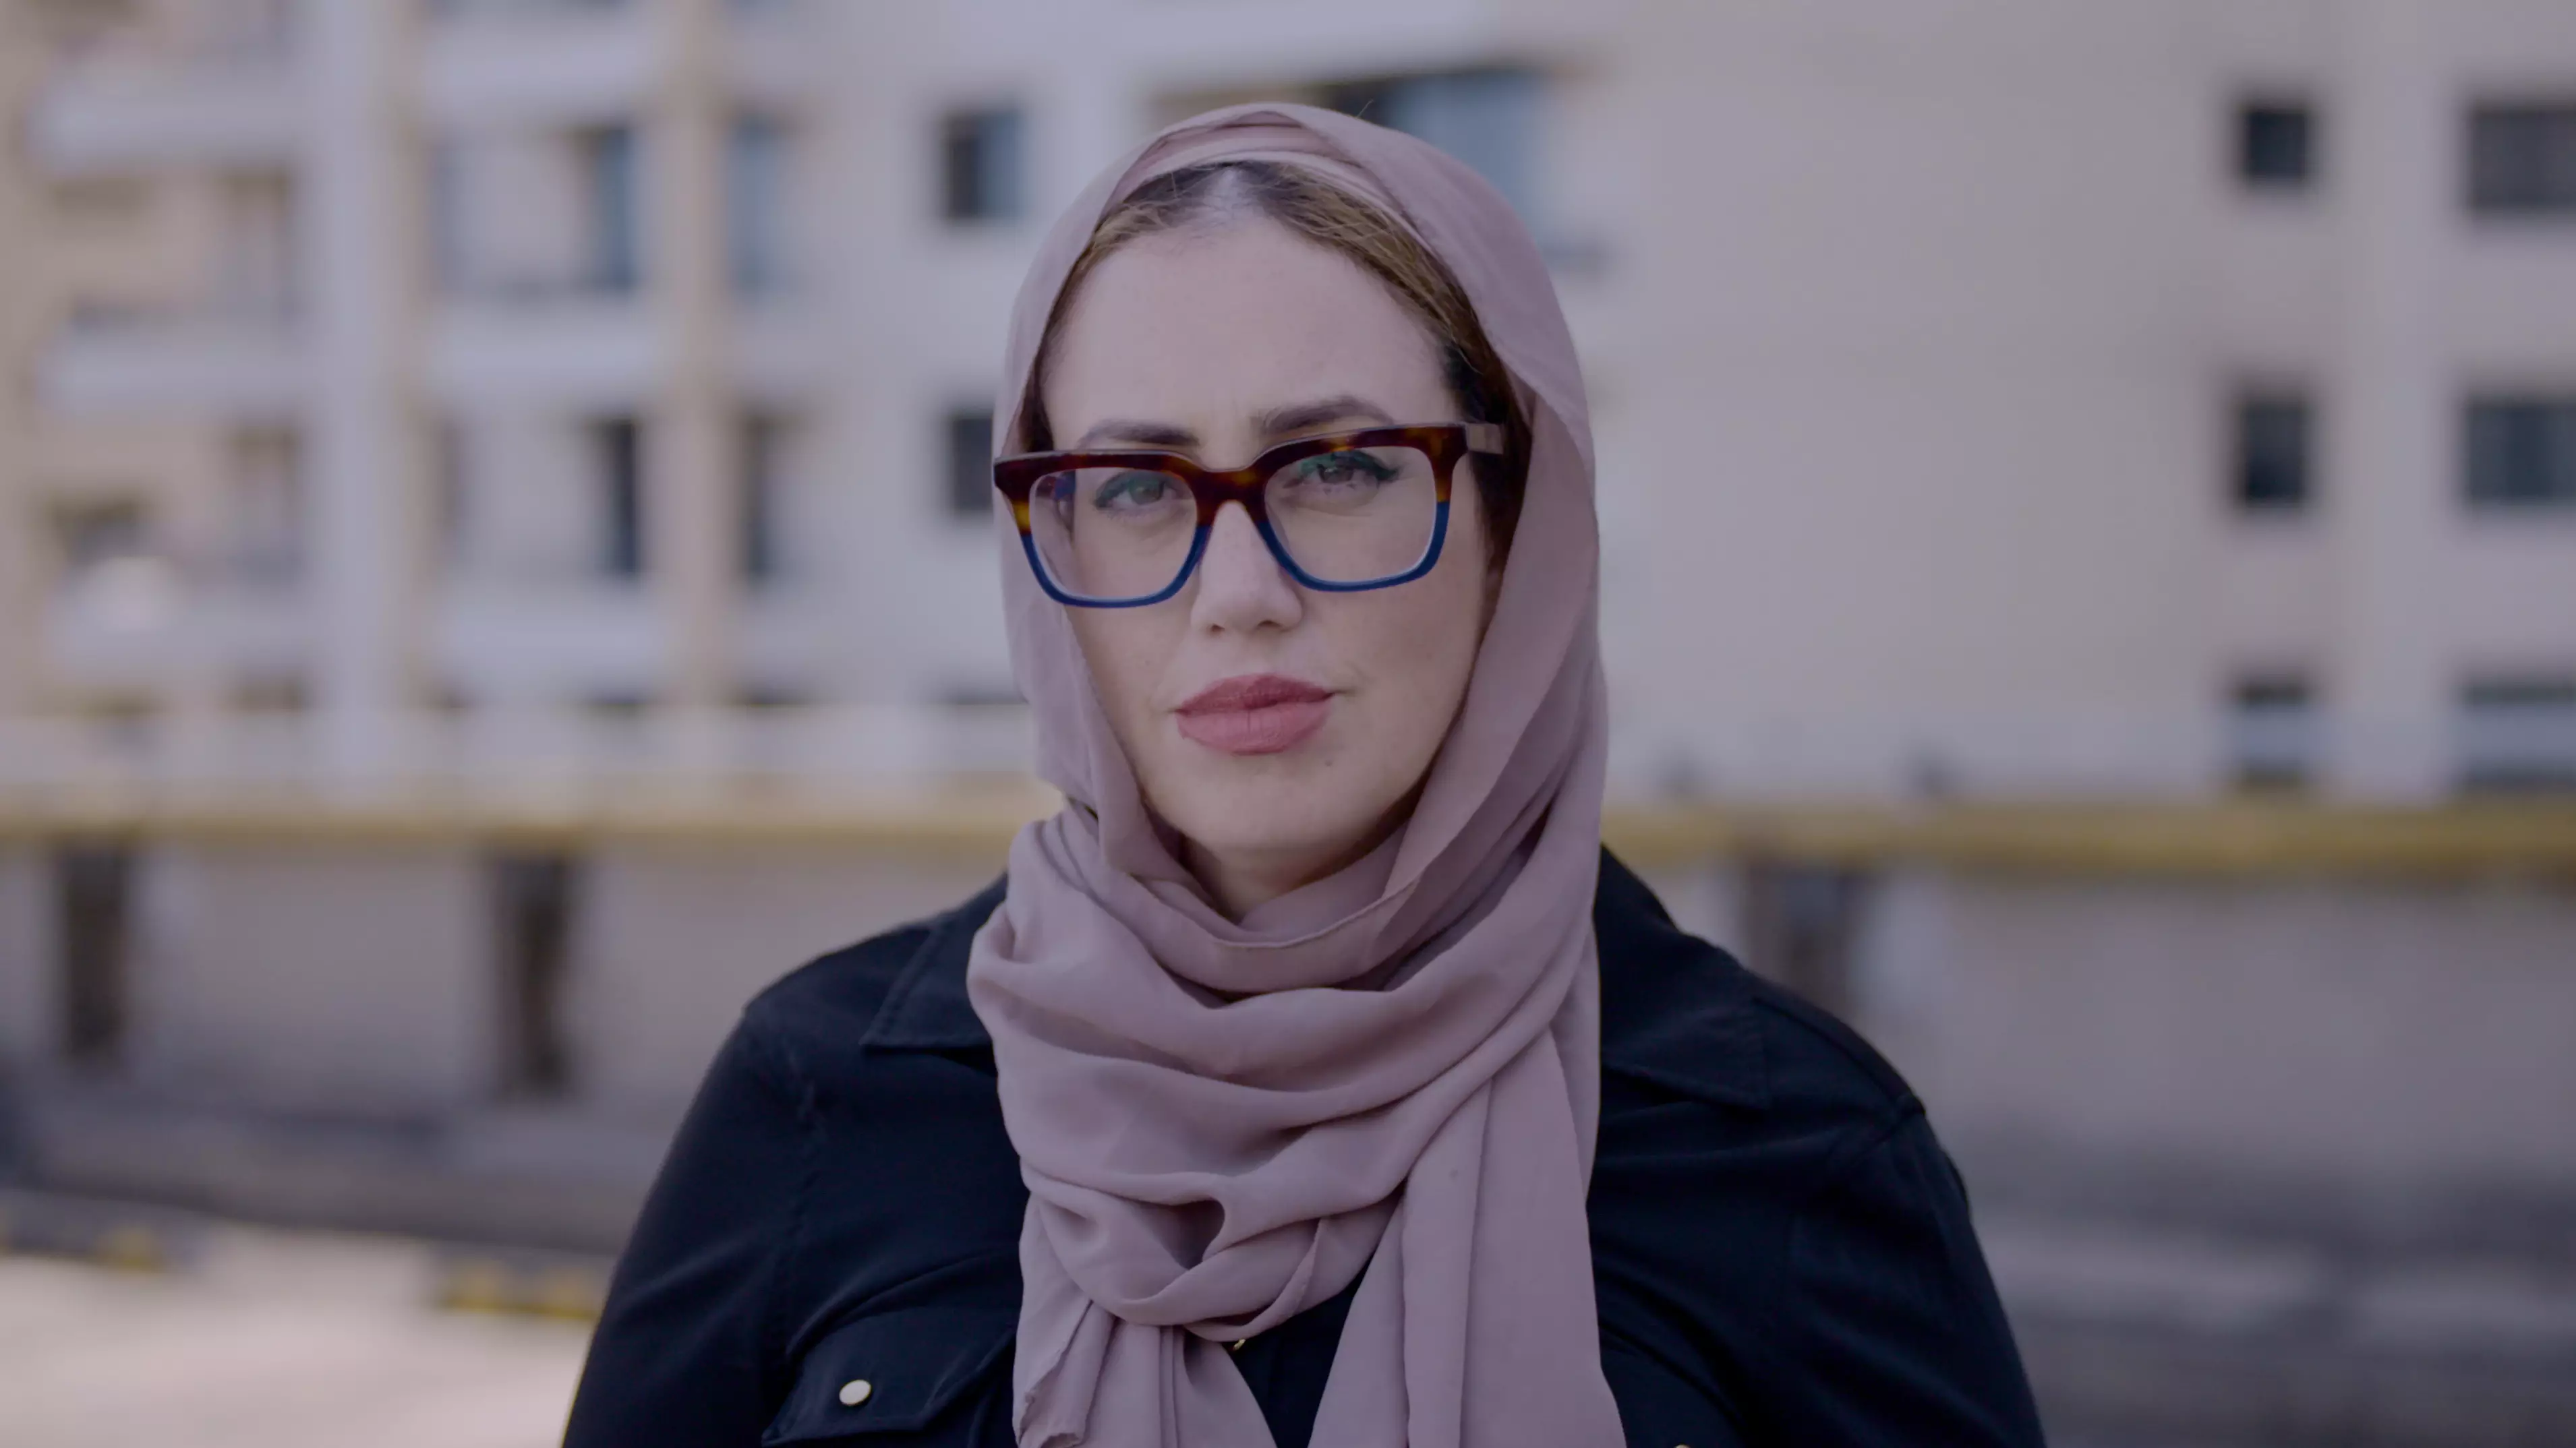 UNHEARD: Islamic Women Open Up About The Racism They Suffer In Australia By Being Visibly Muslim